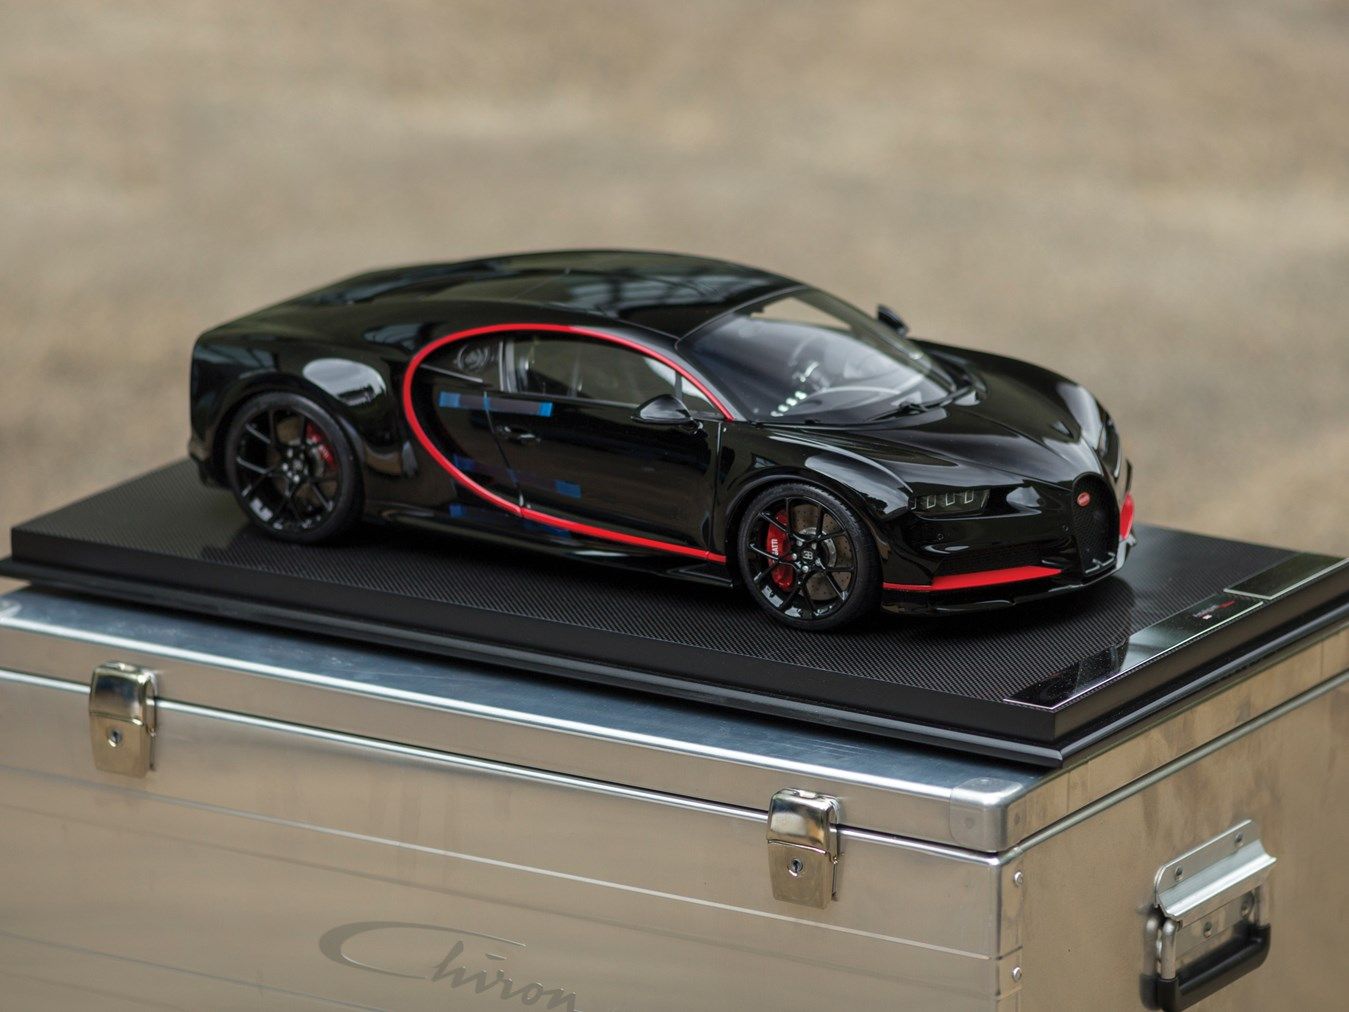 1:8 scale matching die-cast model